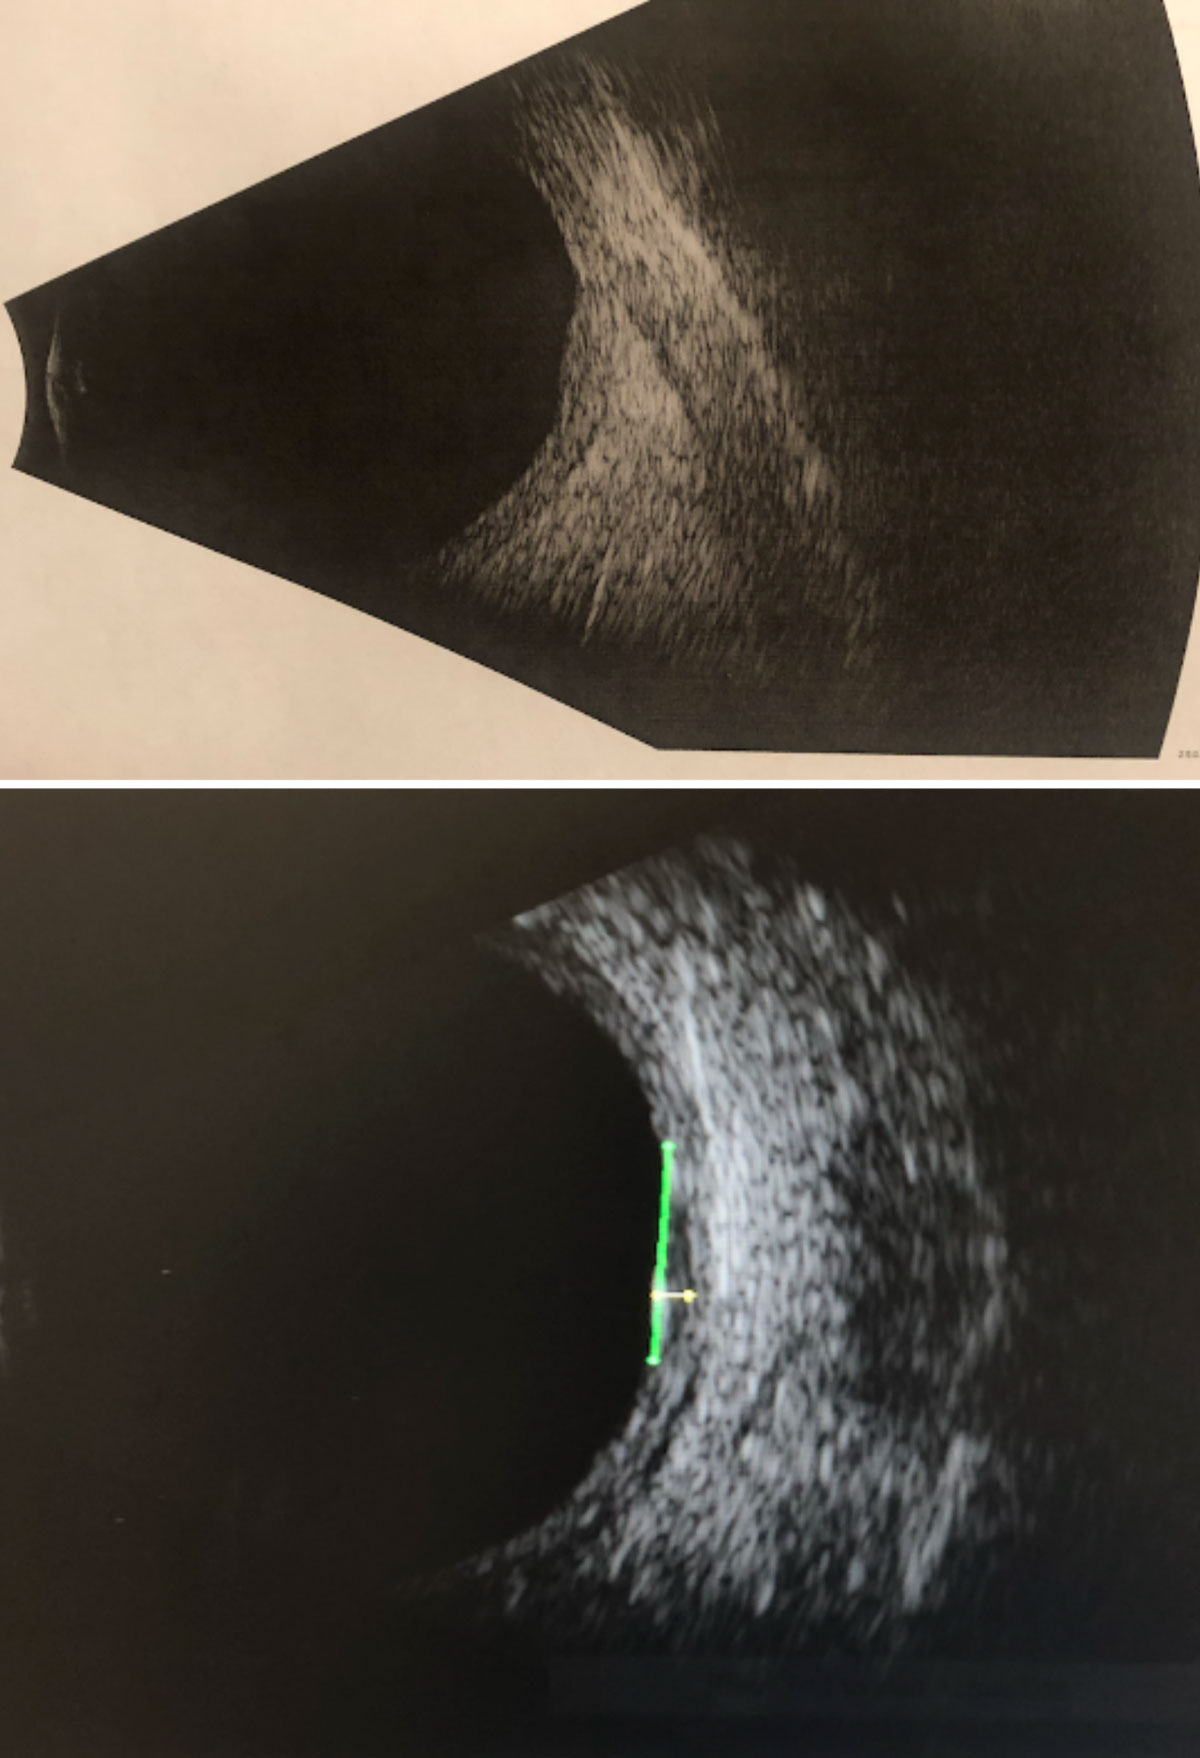 Fig. 11. B-scan ultrasonography through the suspicious lesion in the left eye without measurements (top) and with measurements (bottom): High internal reflectivity; transverse = 6.76mm; longitudinal = 5.92mm; horizontal (thickness) = 1.11mm. 